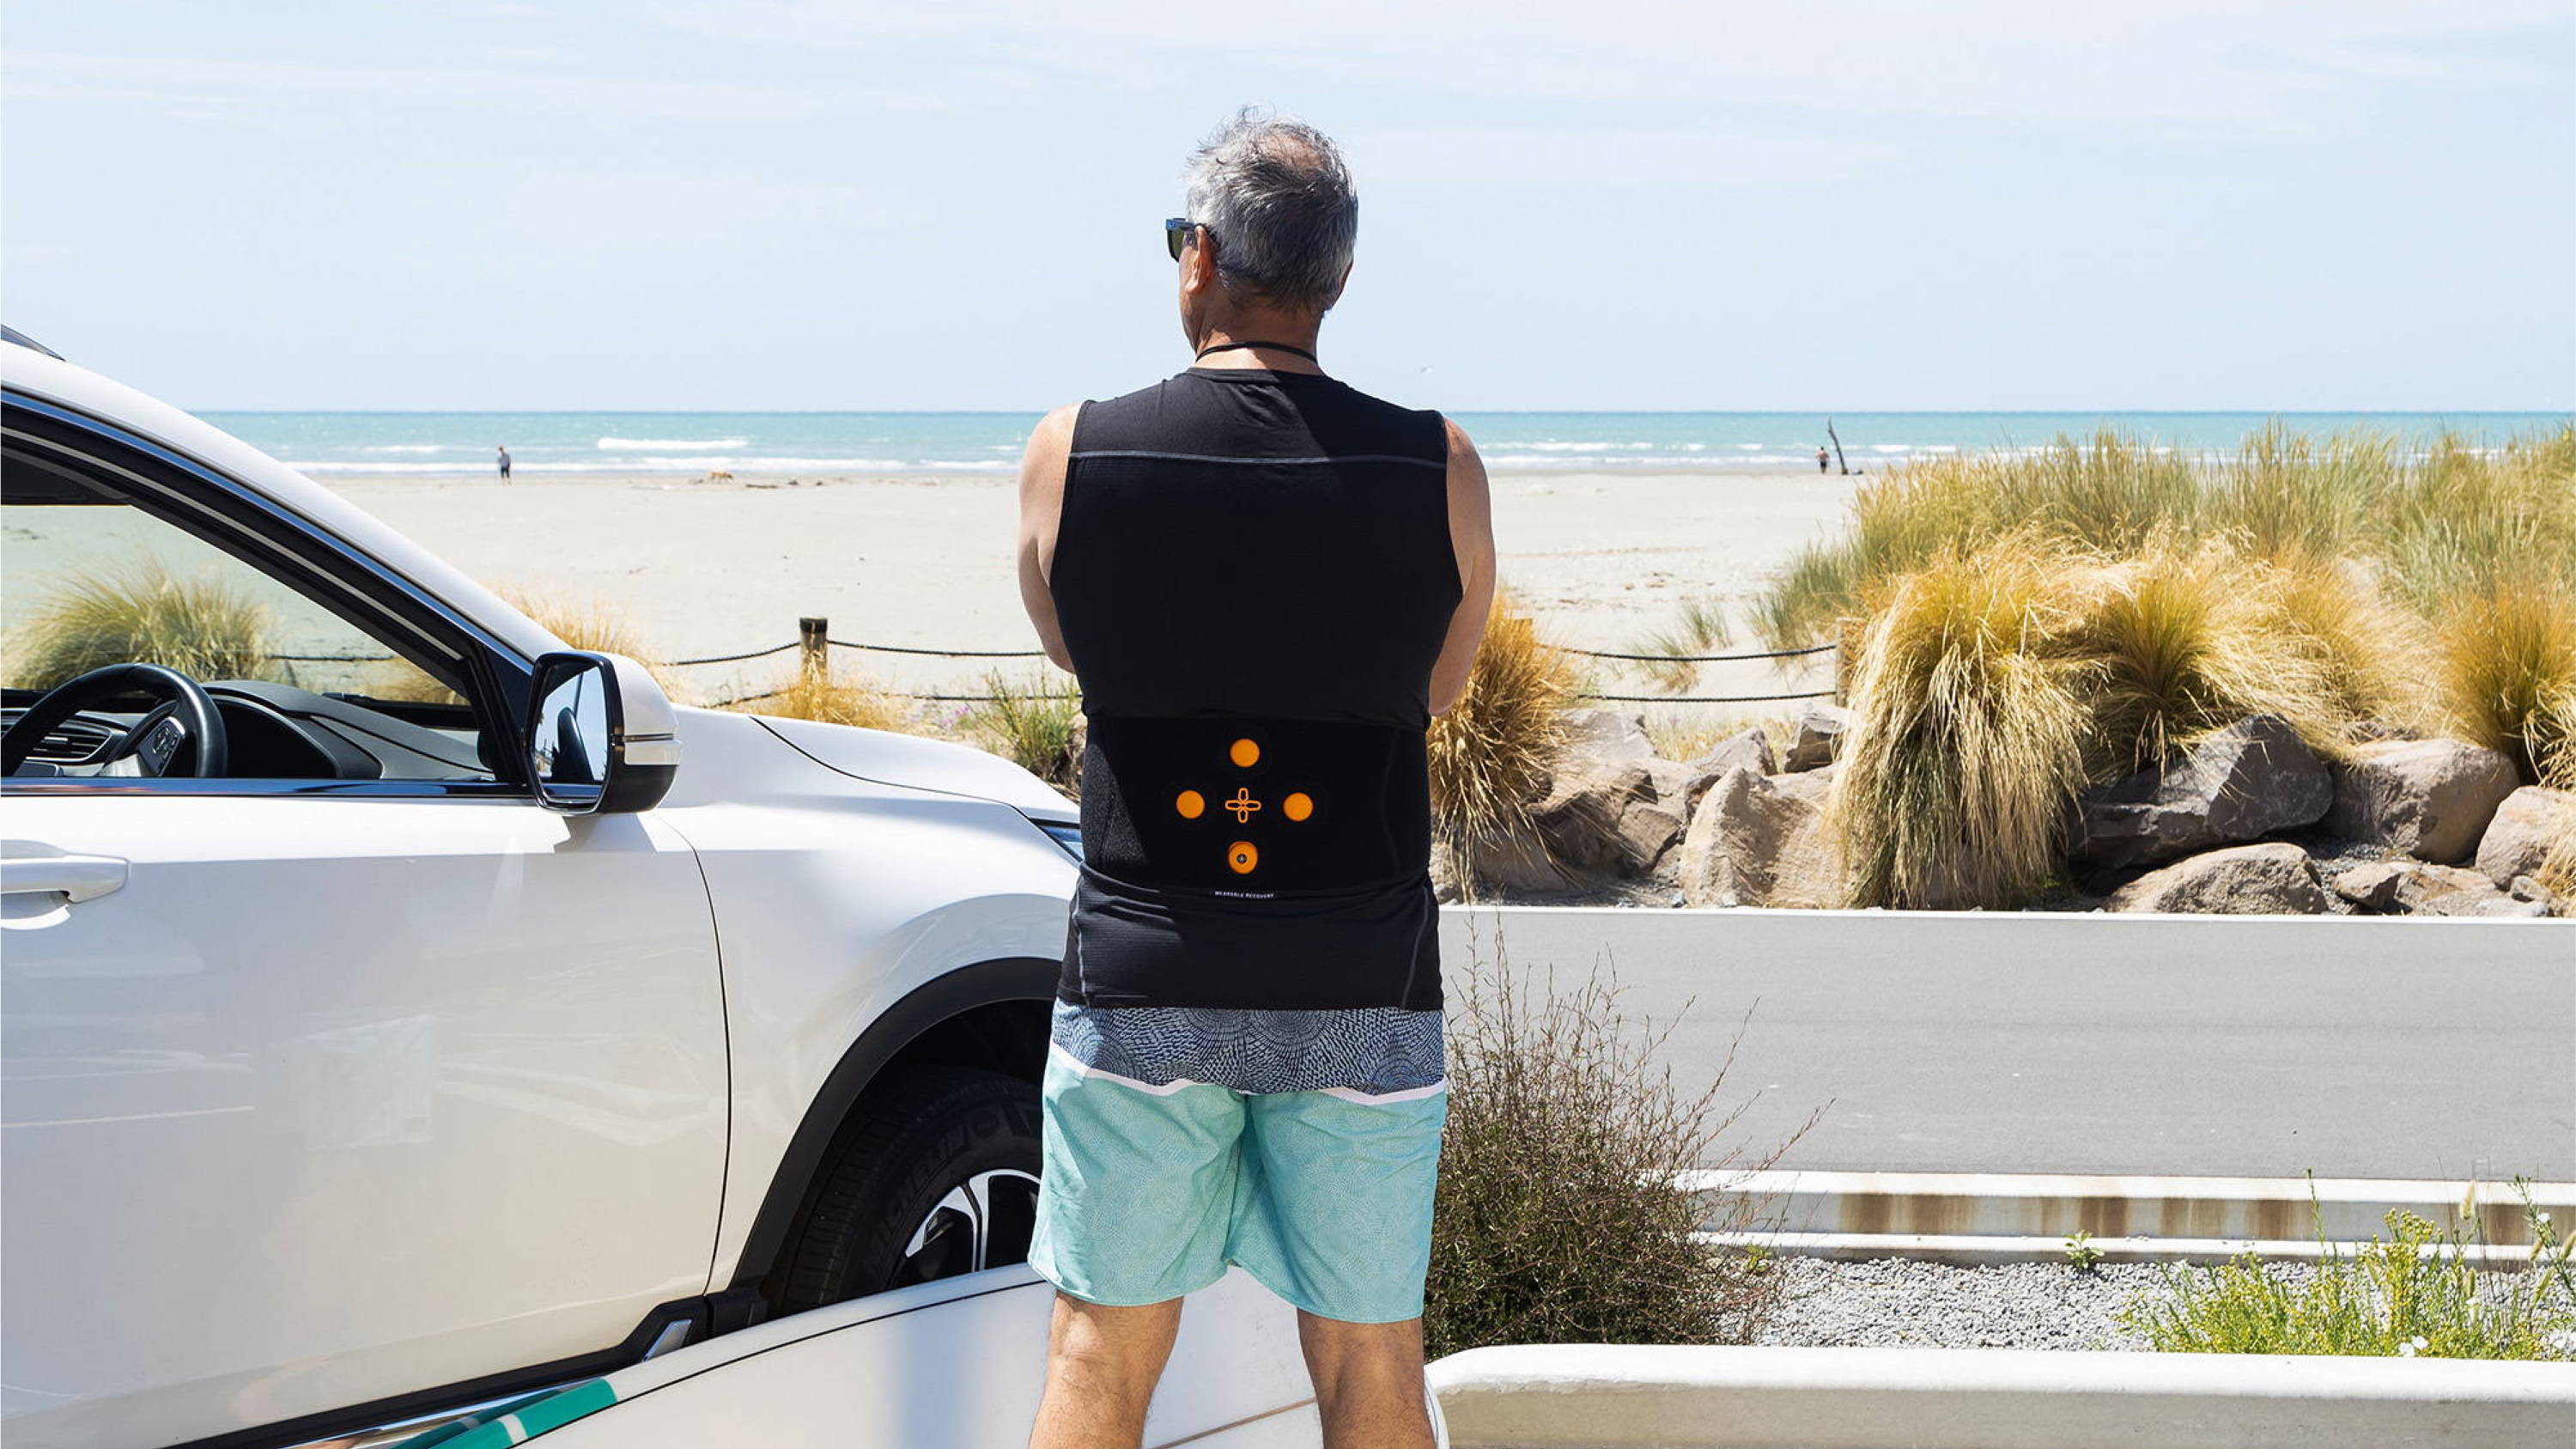 Lower back pain wearable physiotherapy for surfers.